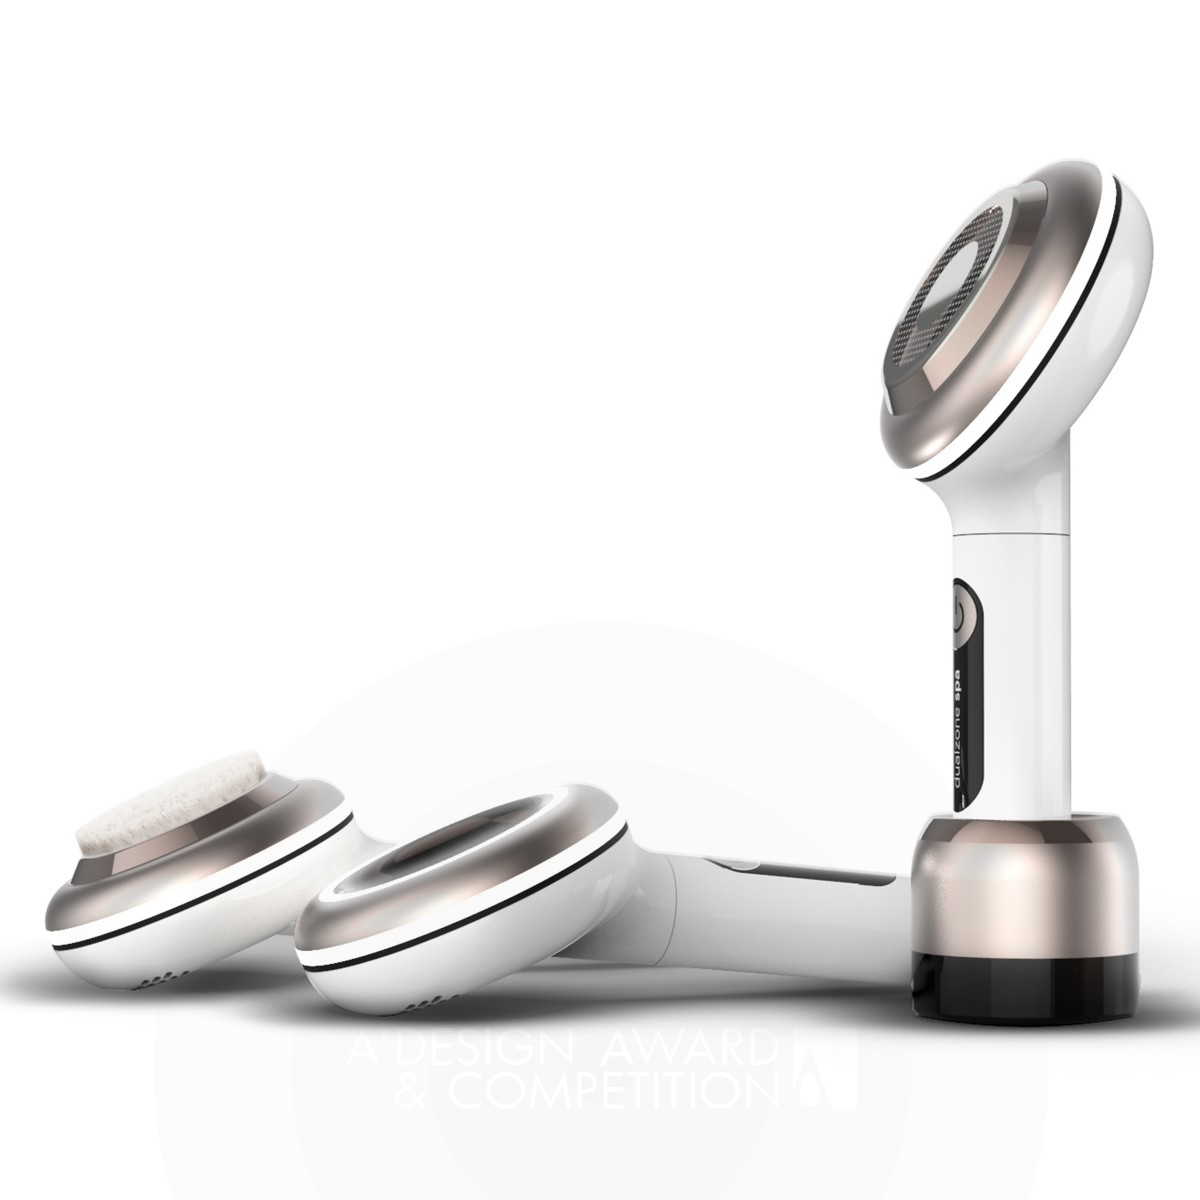 Ergo Spa Beauty Care Product by Arbo Design Silver Beauty, Personal Care and Cosmetic Products Design Award Winner 2021 